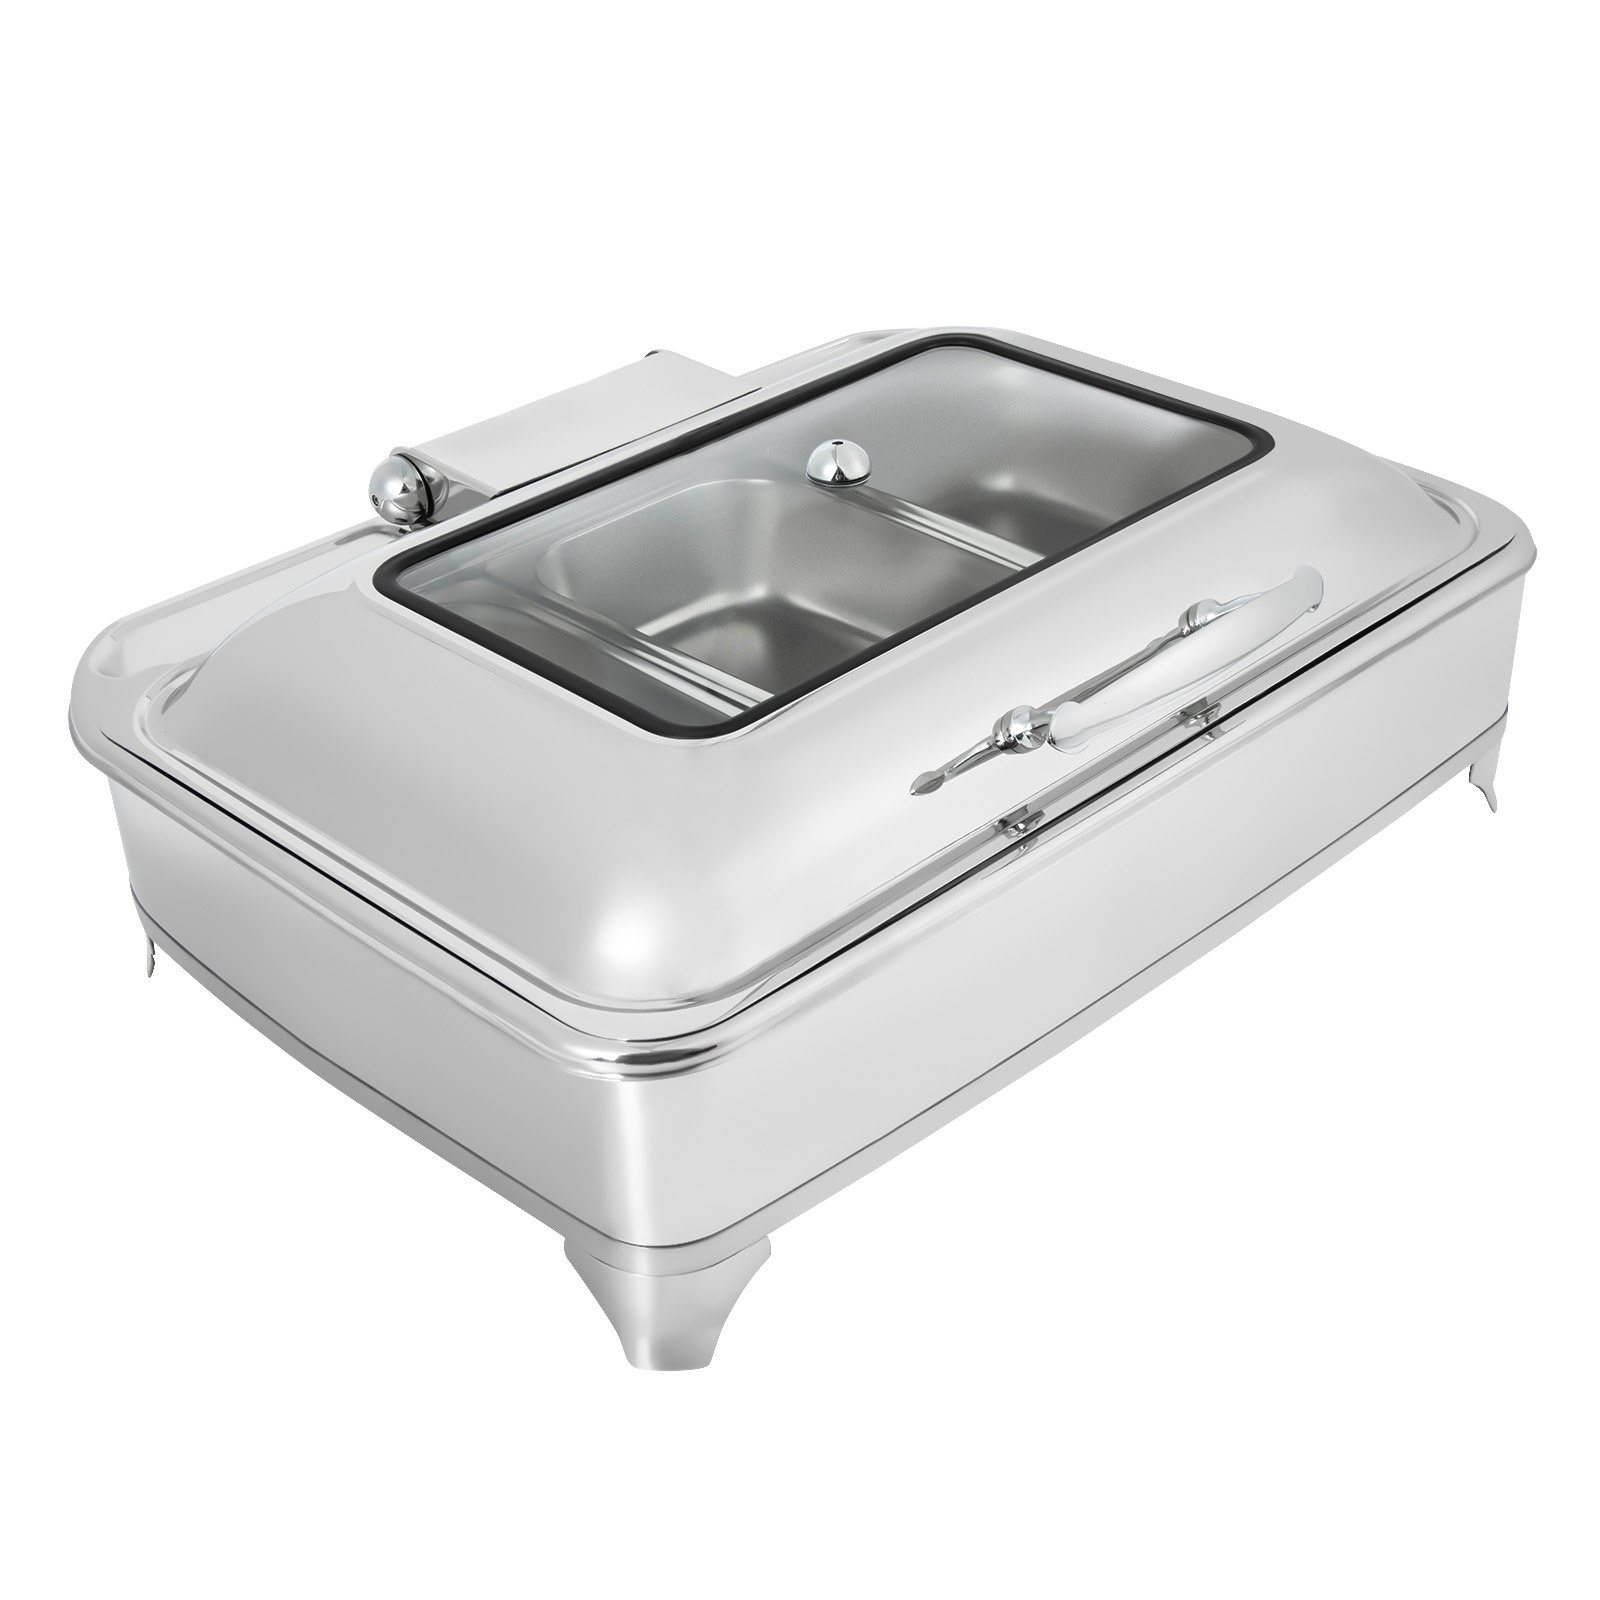 Food Warmers for Parties Buffets Electric, Stainless Steel Buffet Server  and Warming Tray, 9L, Chafing Dish Buffet Set - Adjustable Temperature +  Hot